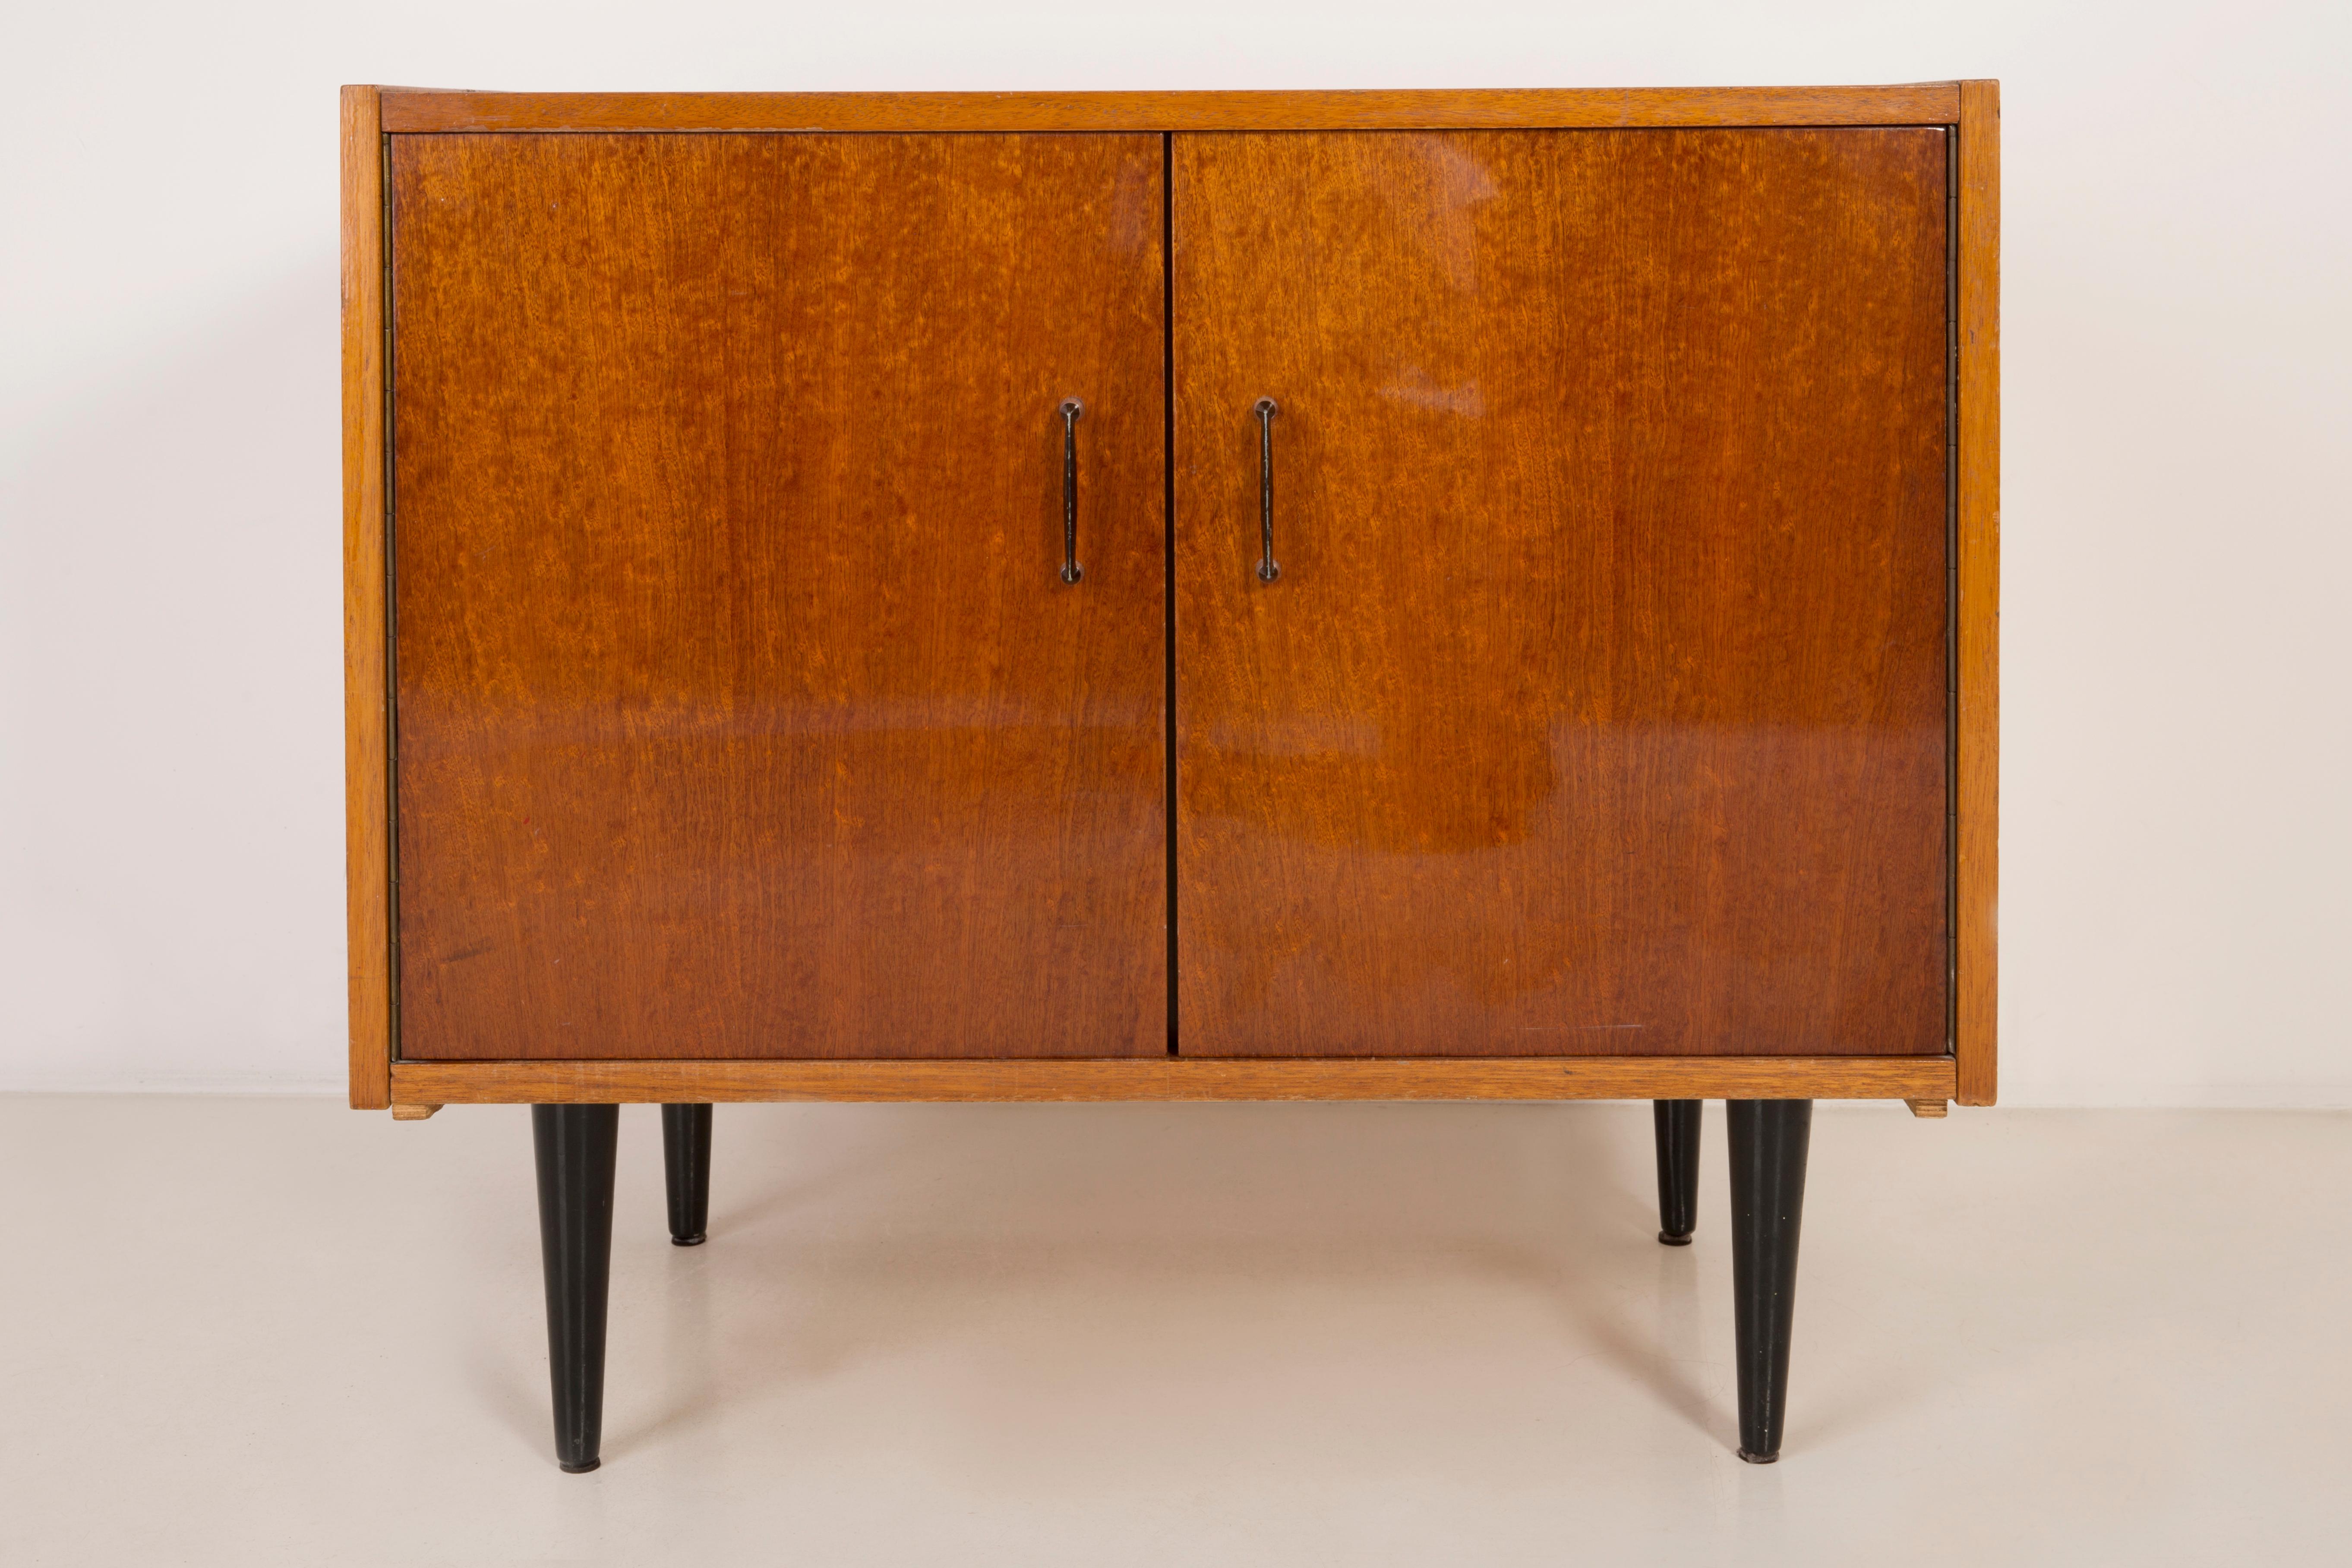 TV side table/sideboard from the 1960s. It was manufactured in Poland. The table was made of wood, it was refreshed. Very good original vintage condition.